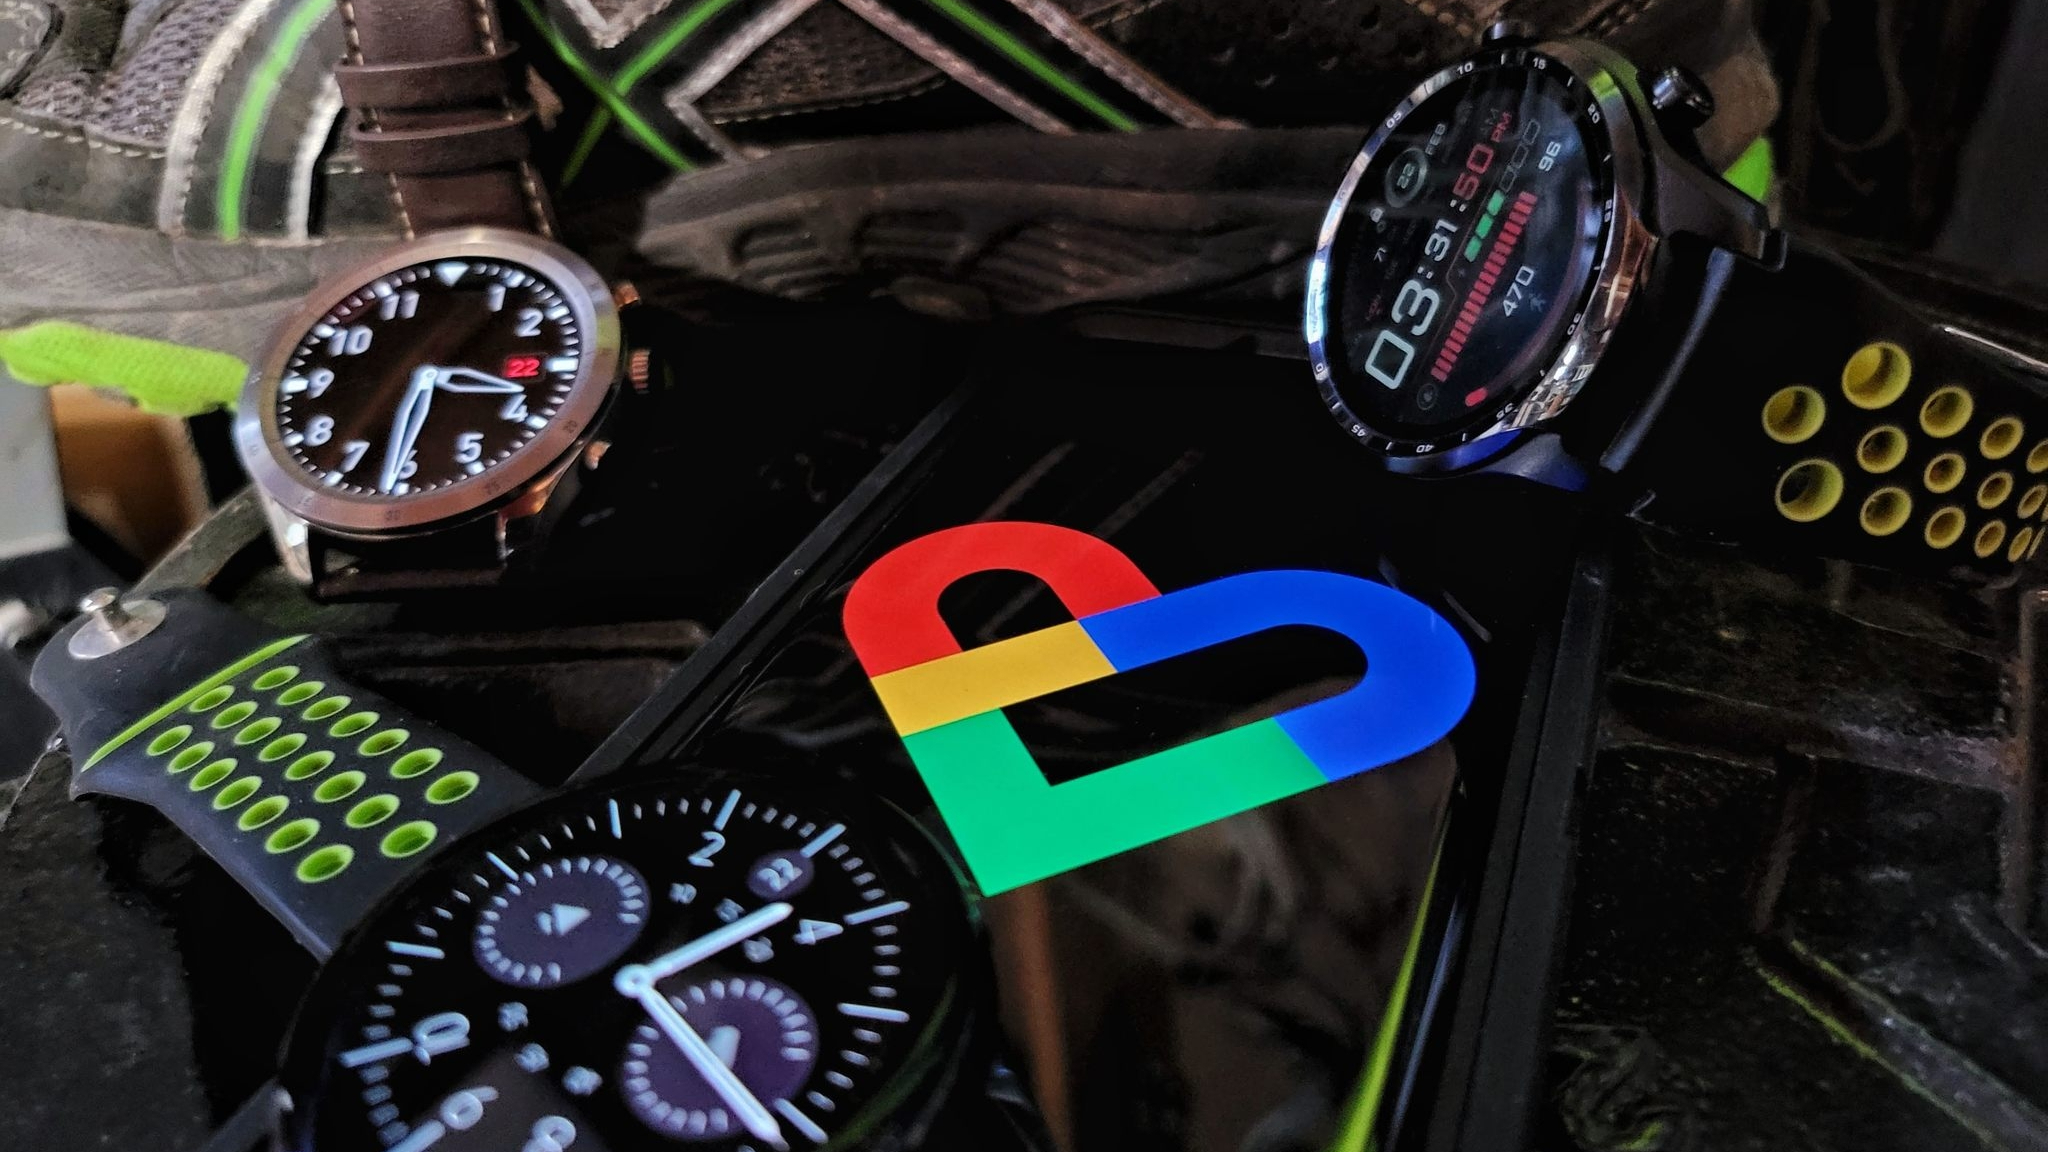 Smartwatches around a smartphone with the Google Fit logo